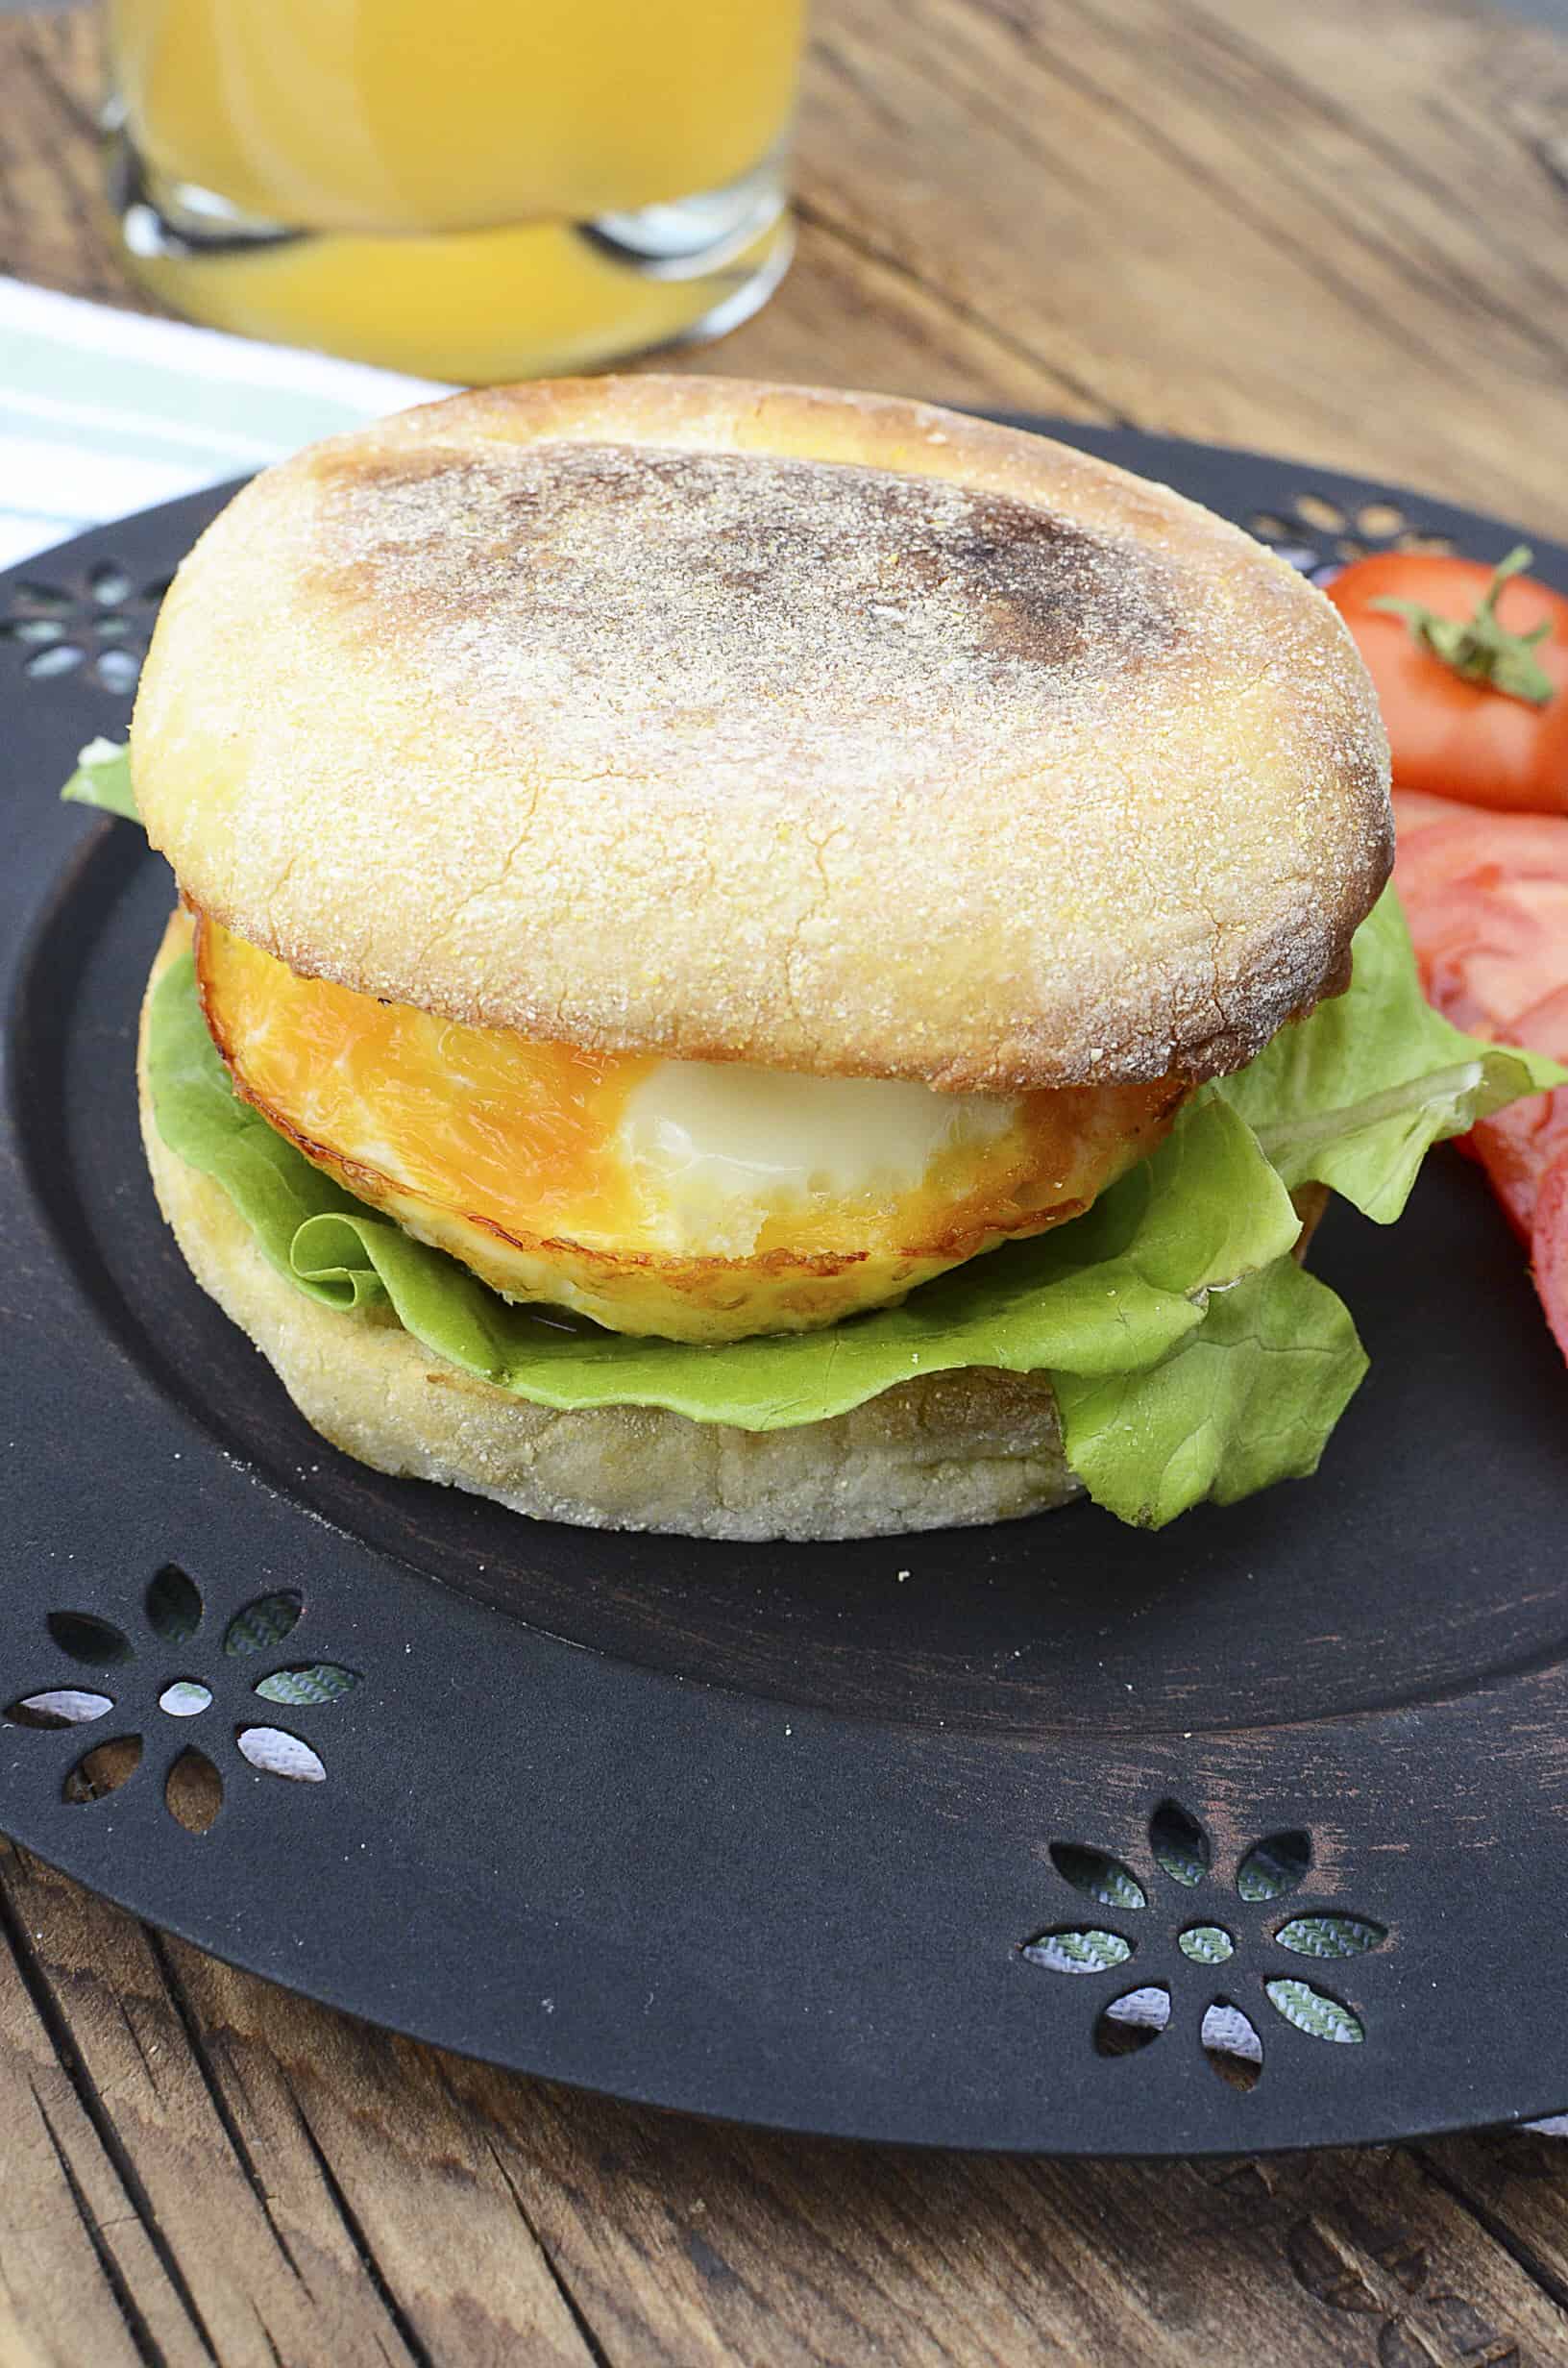 A copycat version of the sausage and egg mcmuffin.